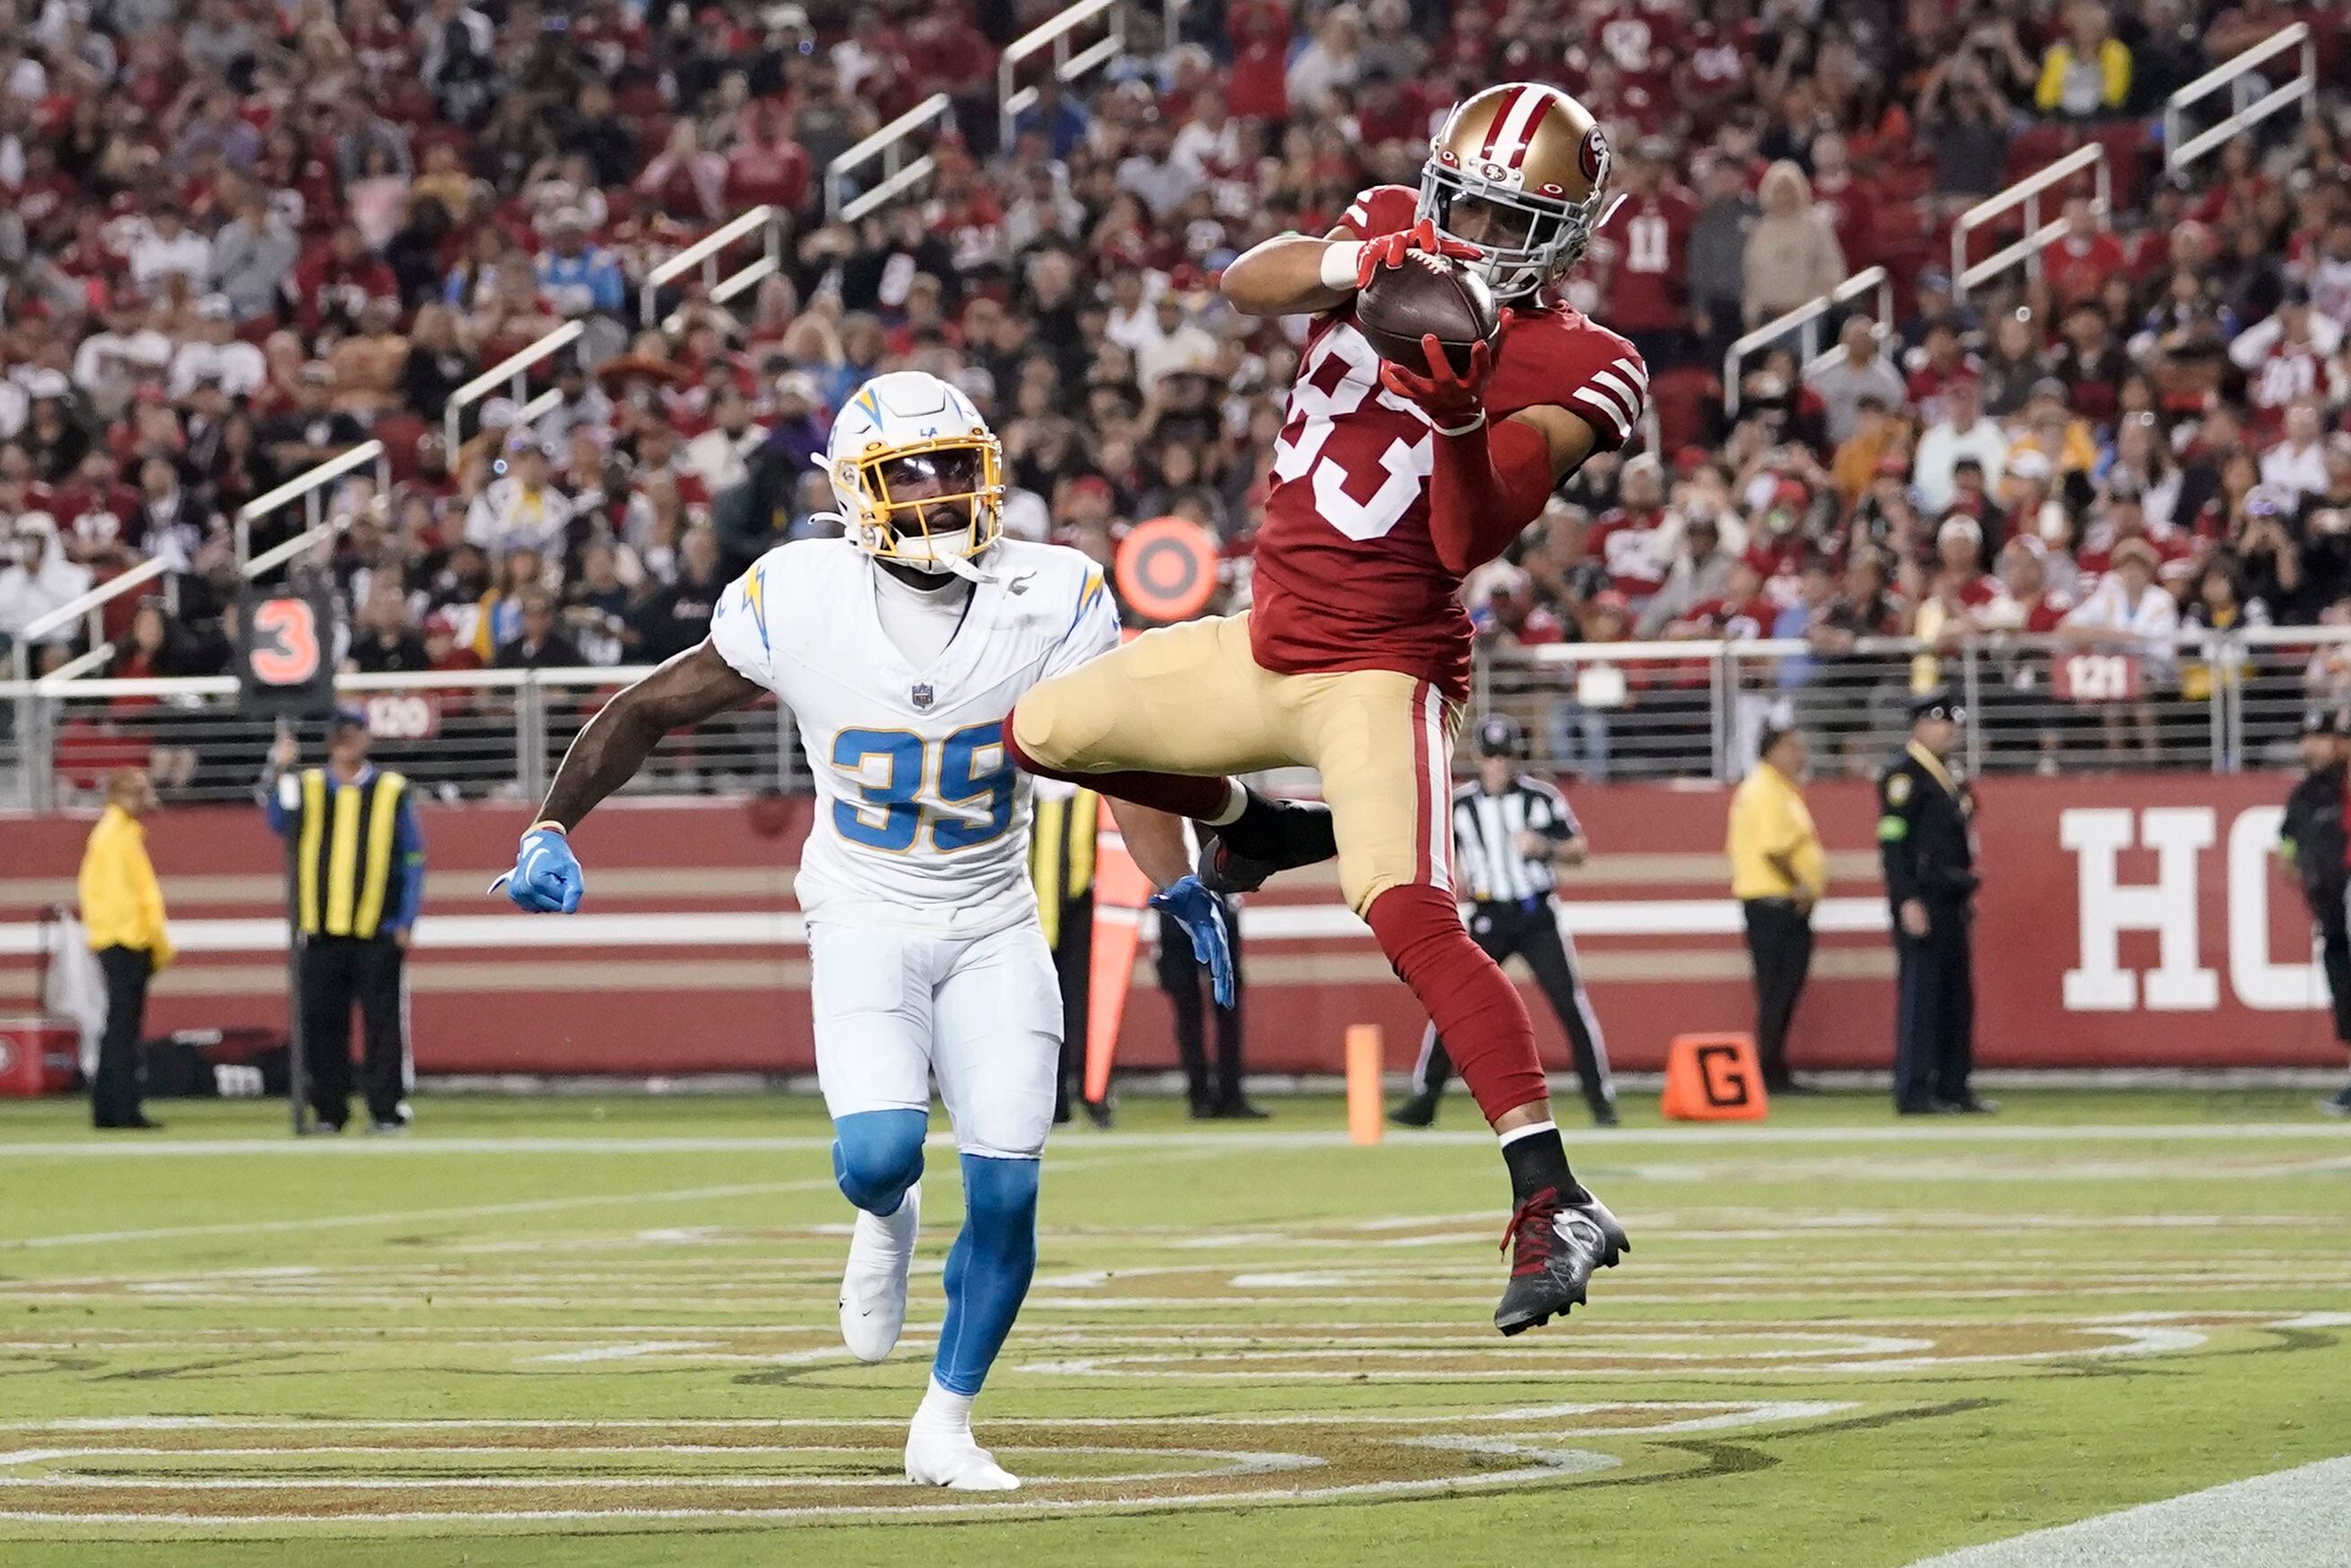 Purdy runs for a TD before Chargers backups roll past 49ers 23-12 - ABC News